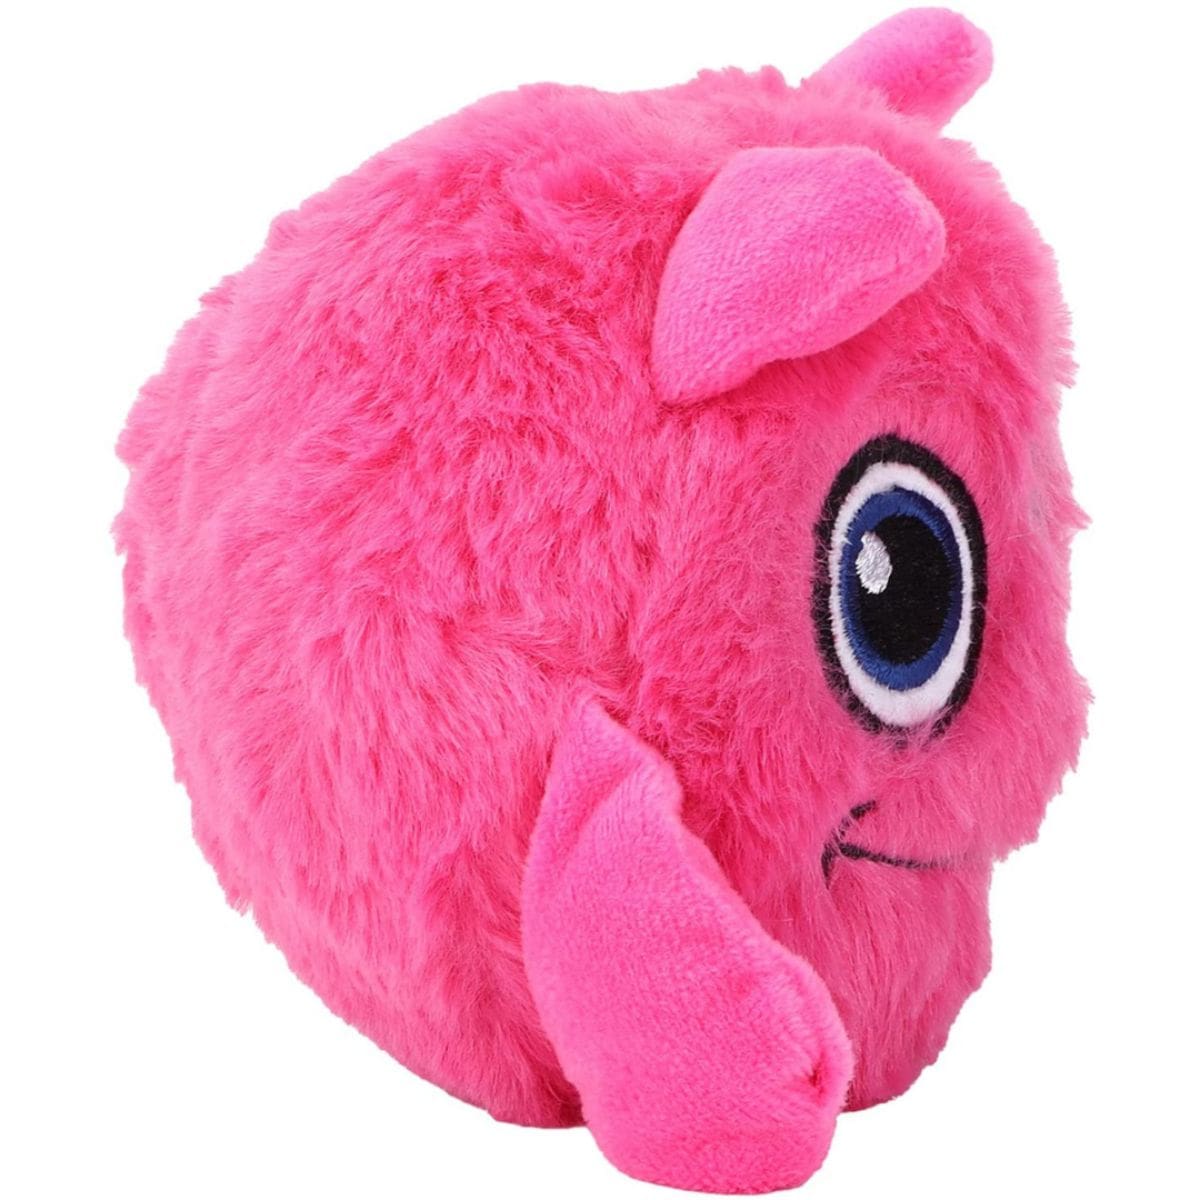 Monster Giggling Plush Dog Toy, Dog Shake To Soft And Comfortable Portable  And Light Bright Colors For Motorized Entertainment Interactive Toy For  Pets 